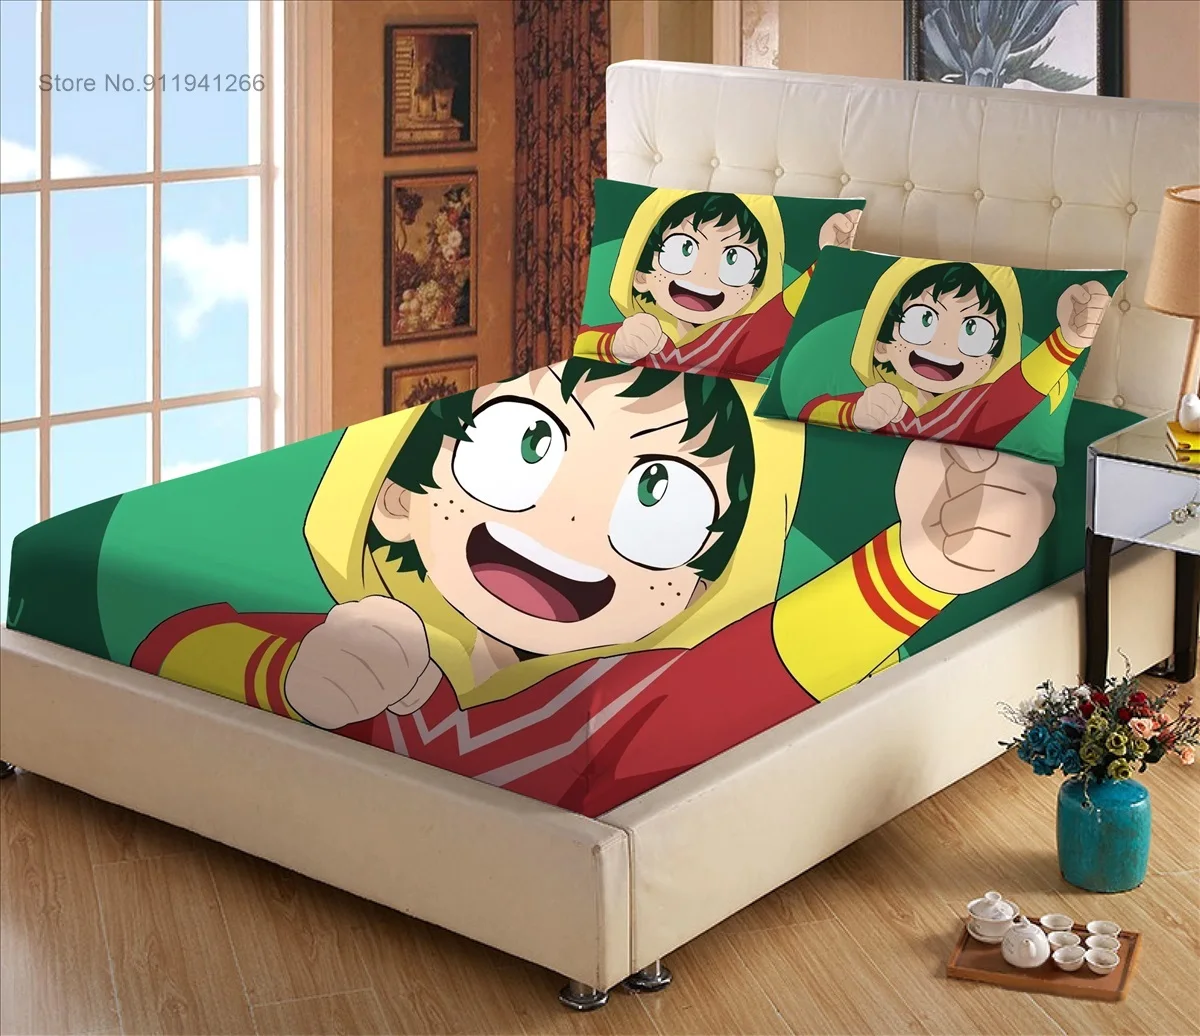 Cartoon My Hero Academia Printed Flannel Elastic Fitted Sheet Warm And Thick Bedlinens Winter Mattress Cover Protector 150x200cm